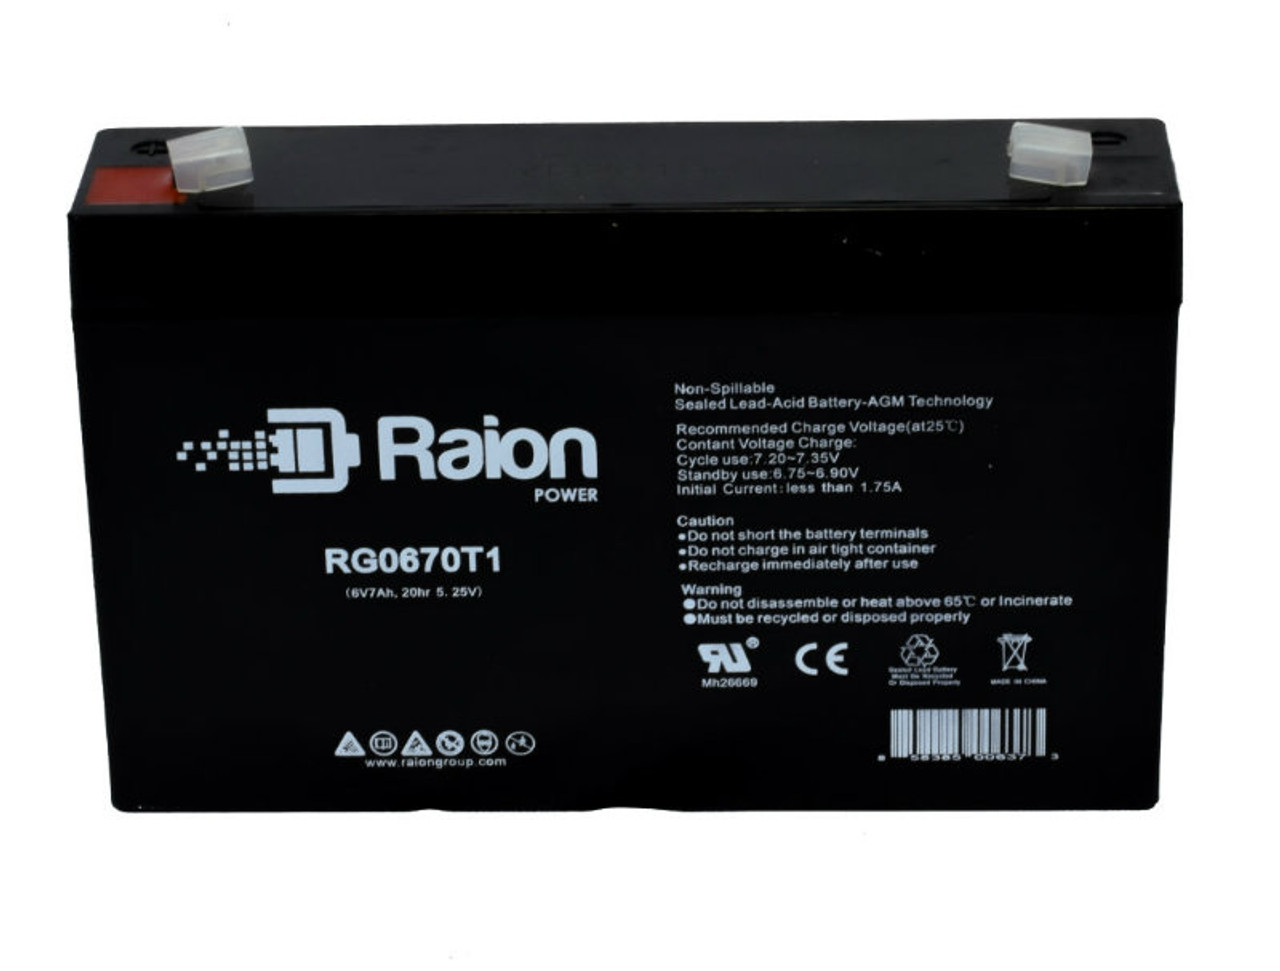 Raion Power RG0670T1 Replacement Battery Cartridge for Wonderlanes 2712 Fire Engine